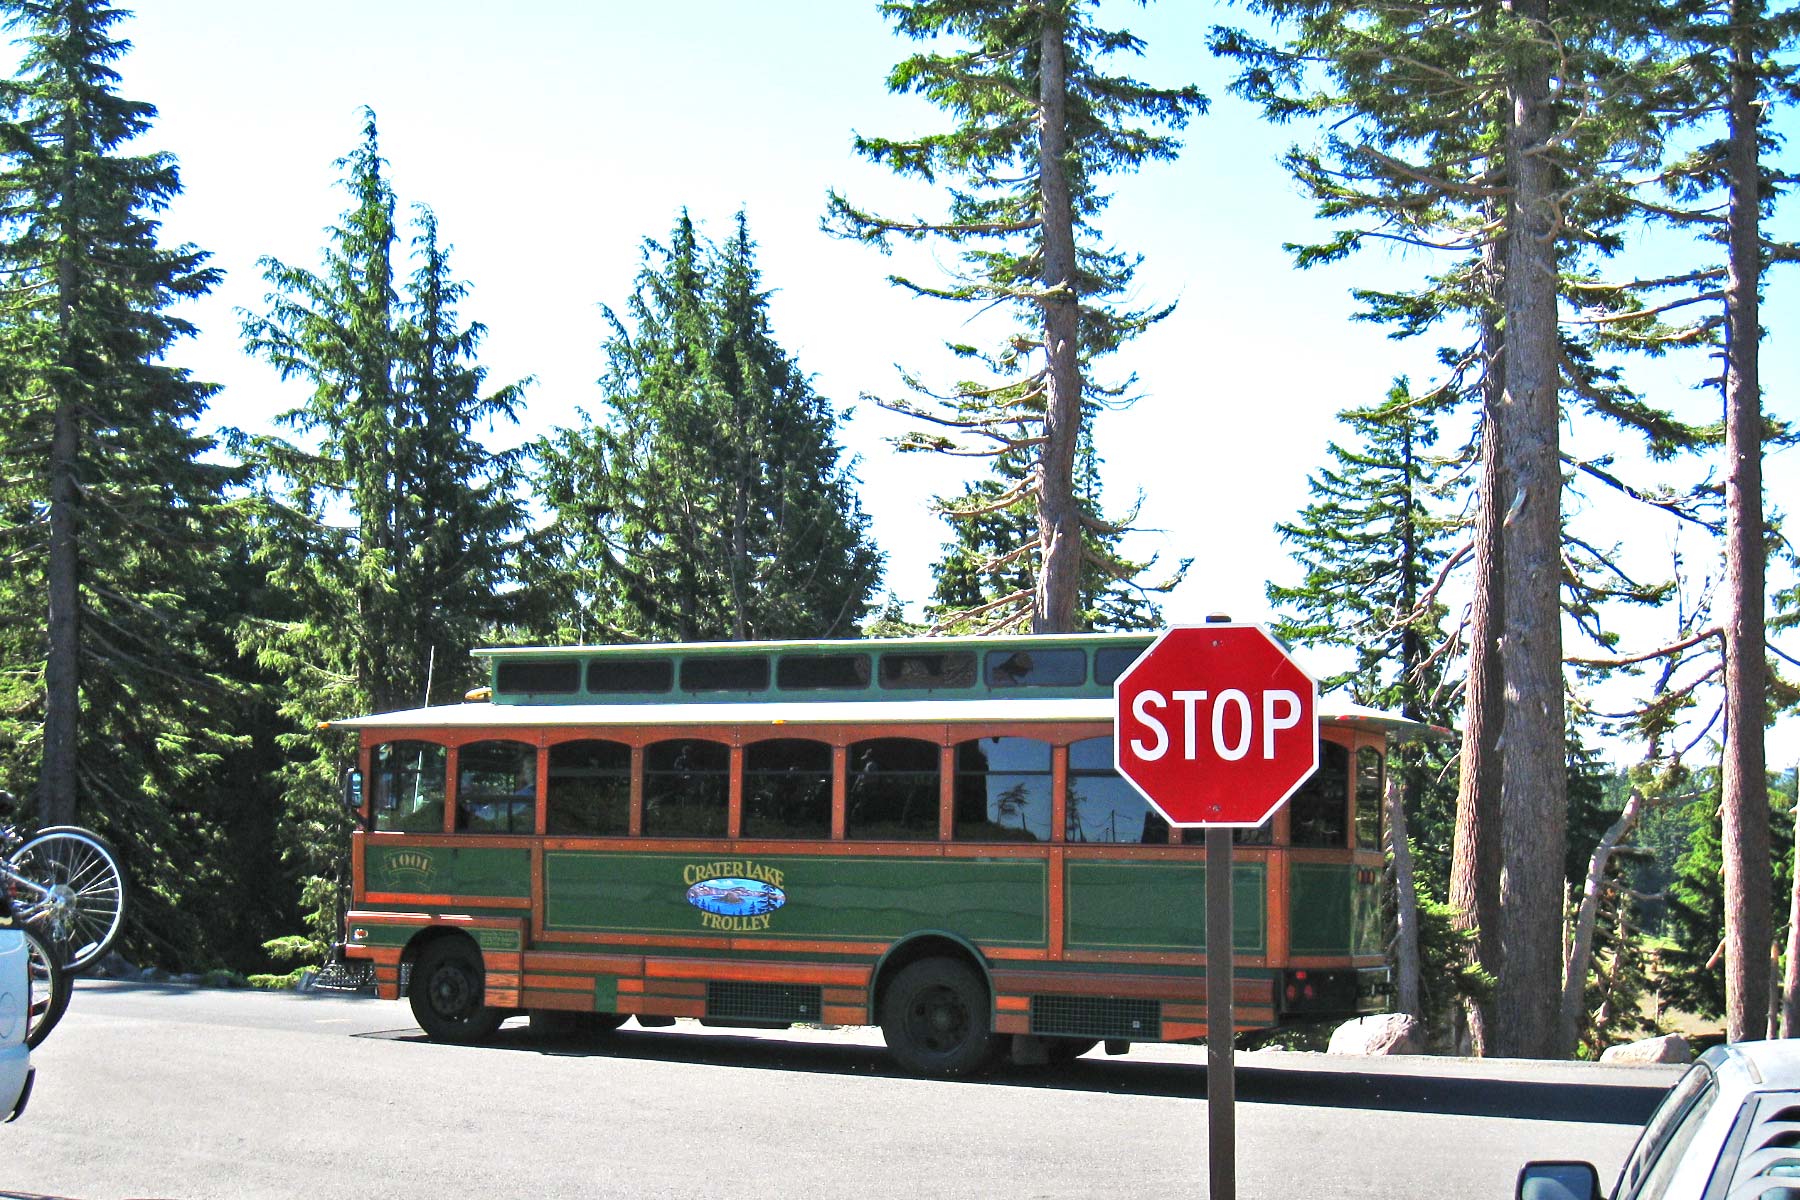 crater lake trolley